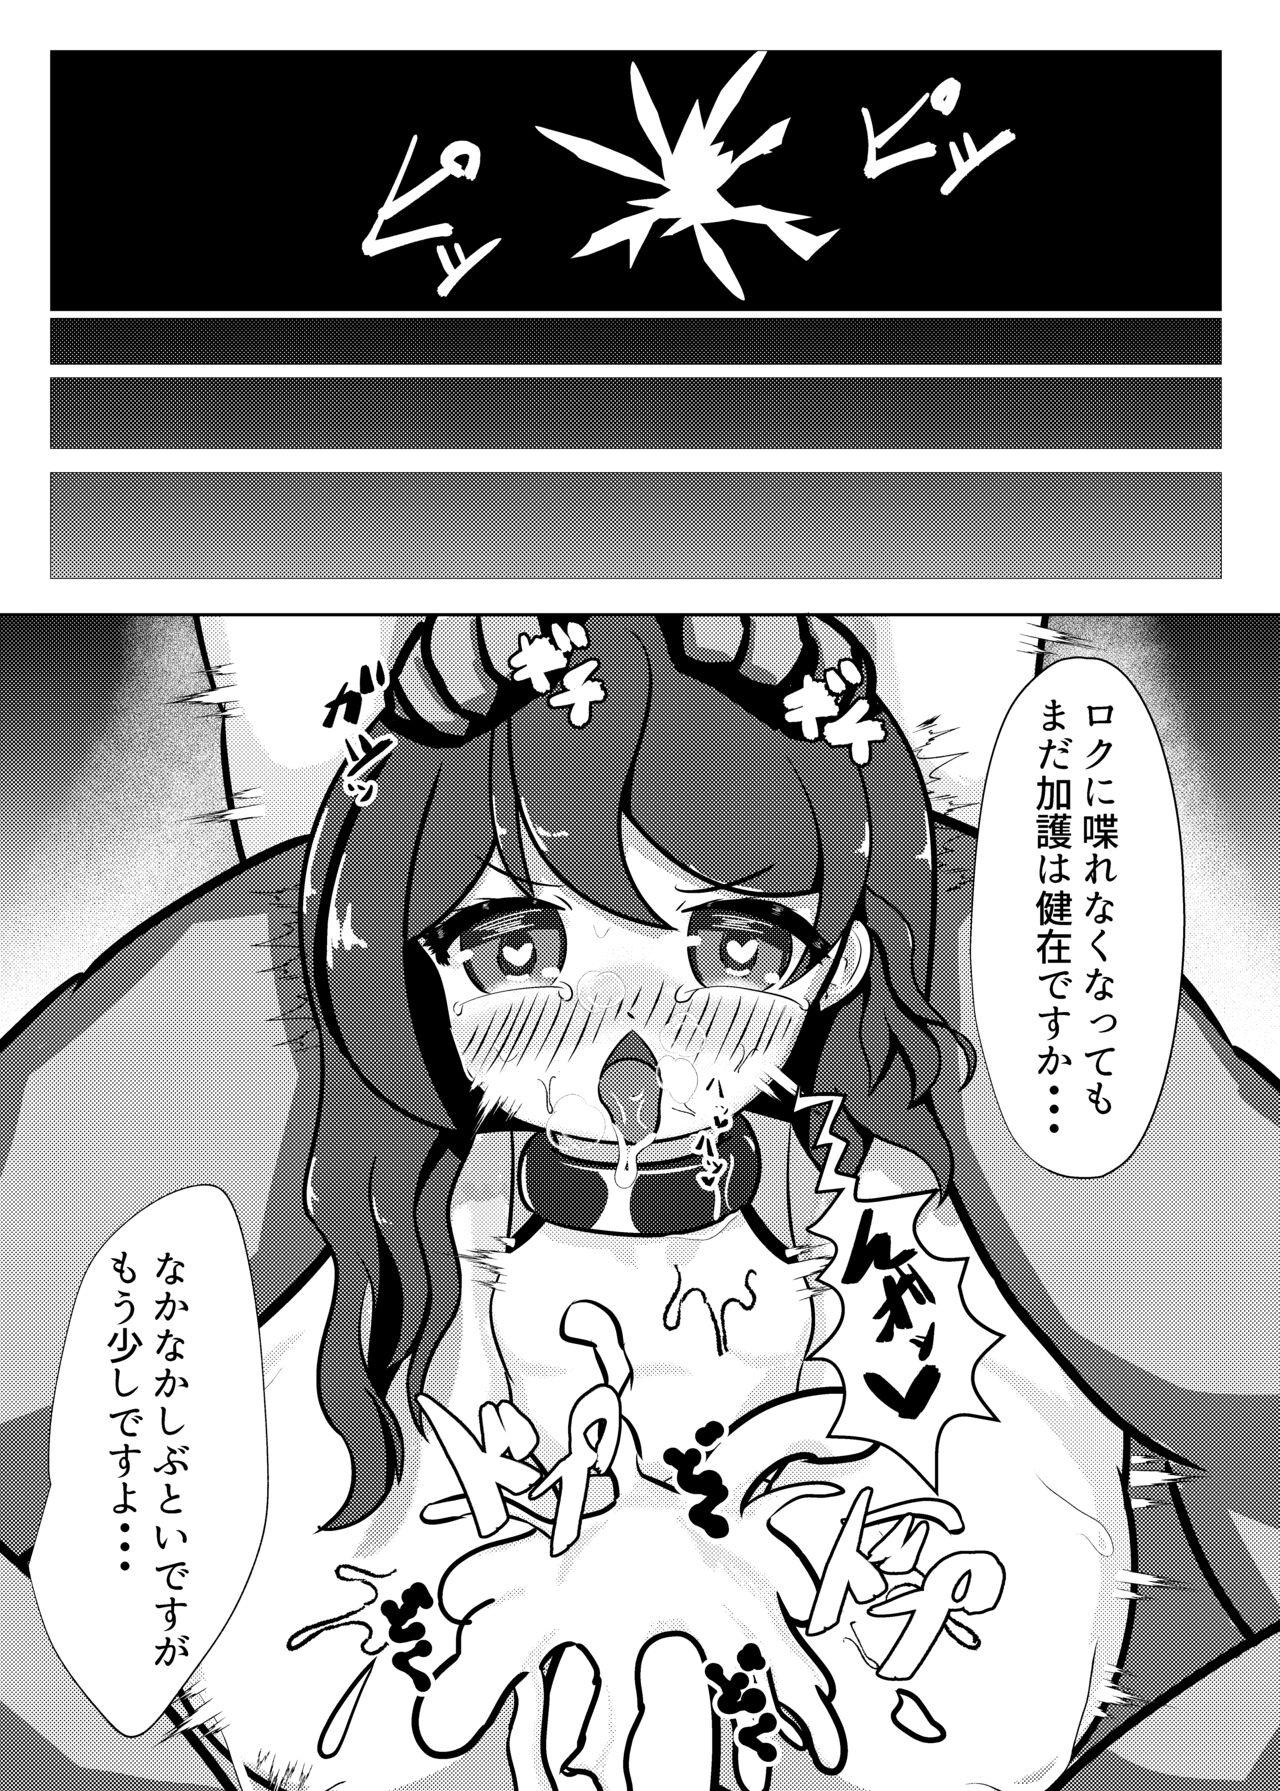 Harcore ヒギリちゃんがひどいめにあう本 蟲教強制改宗悪堕ち編 - Flower knight girl Ass Worship - Page 11